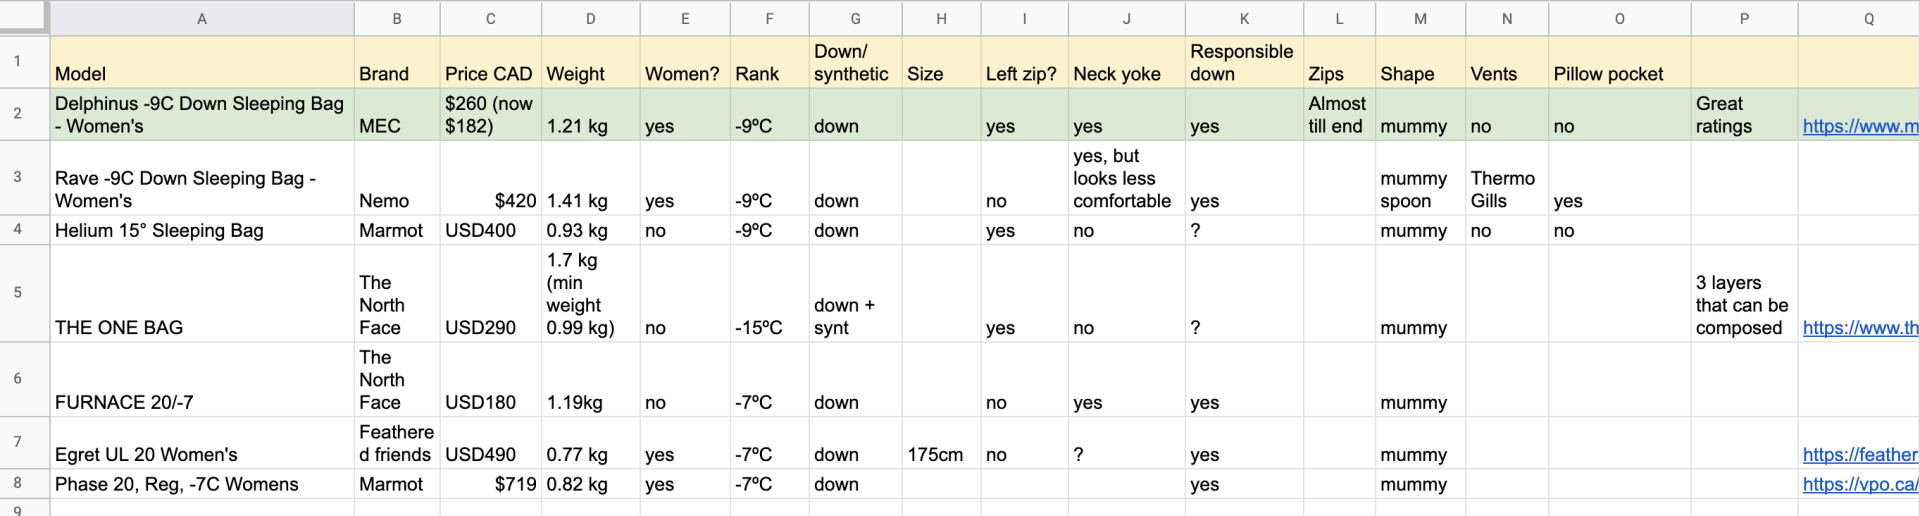 That's how my sleeping bags comparison table looks like